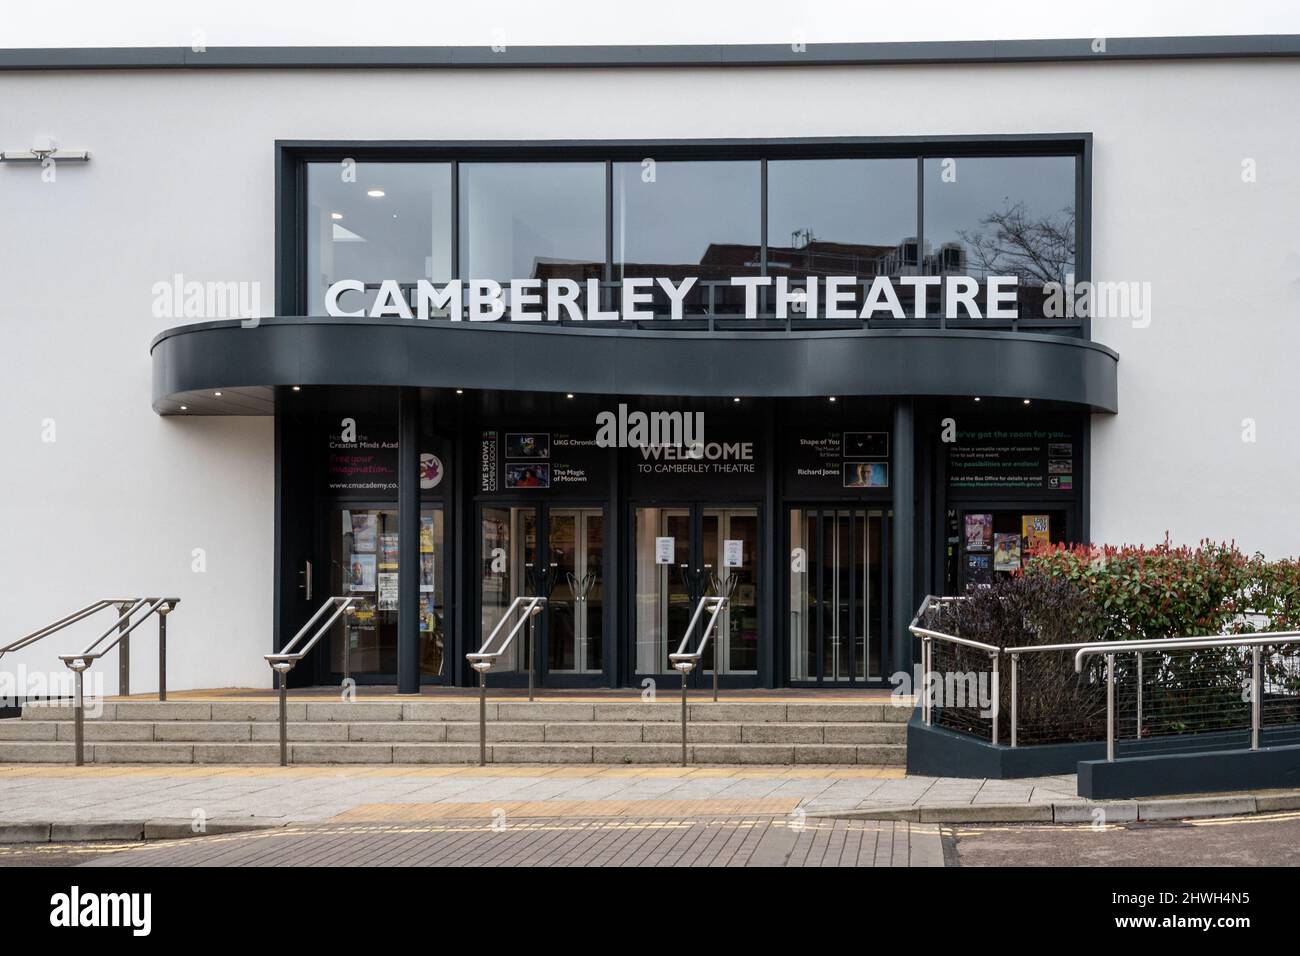 Camberley Theatre, Surrey, Angleterre, Royaume-Uni Banque D'Images